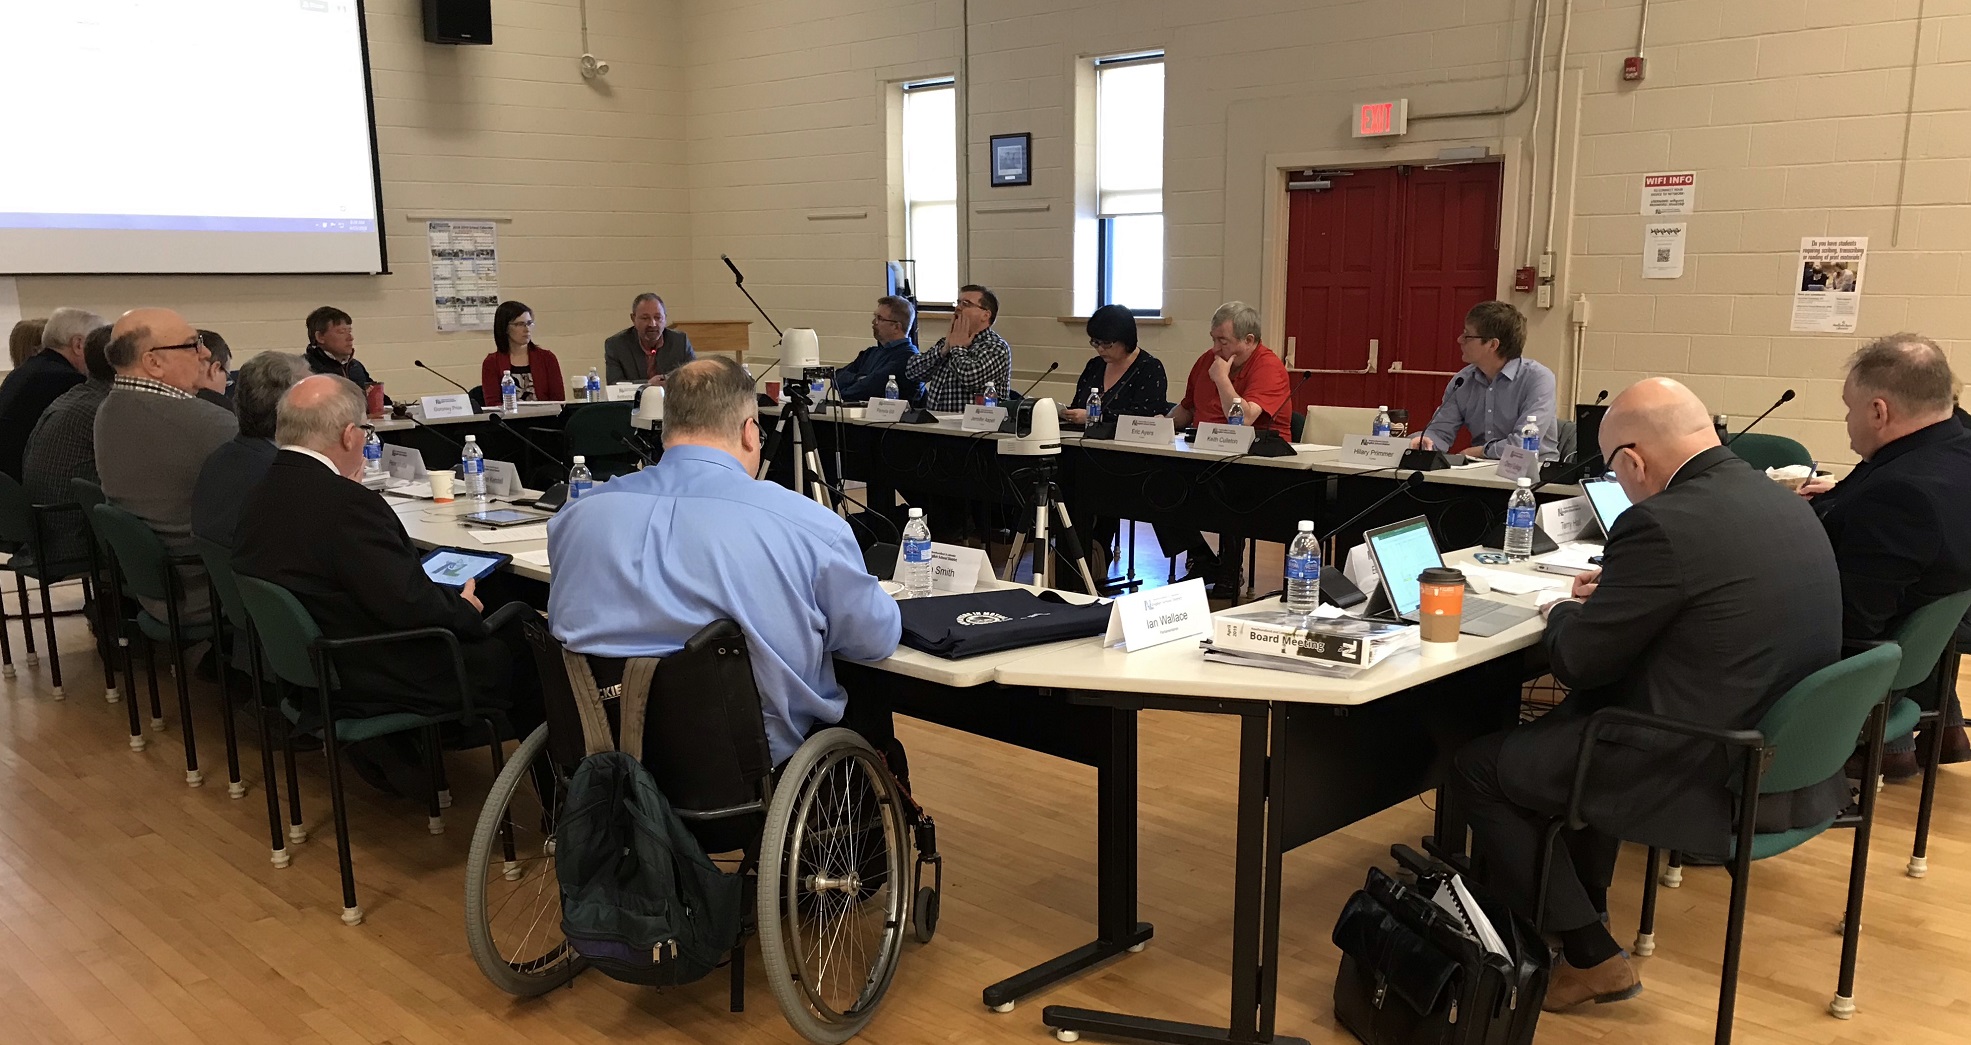 Trustees gathered in St. John's April 13 and 14 to conduct District business